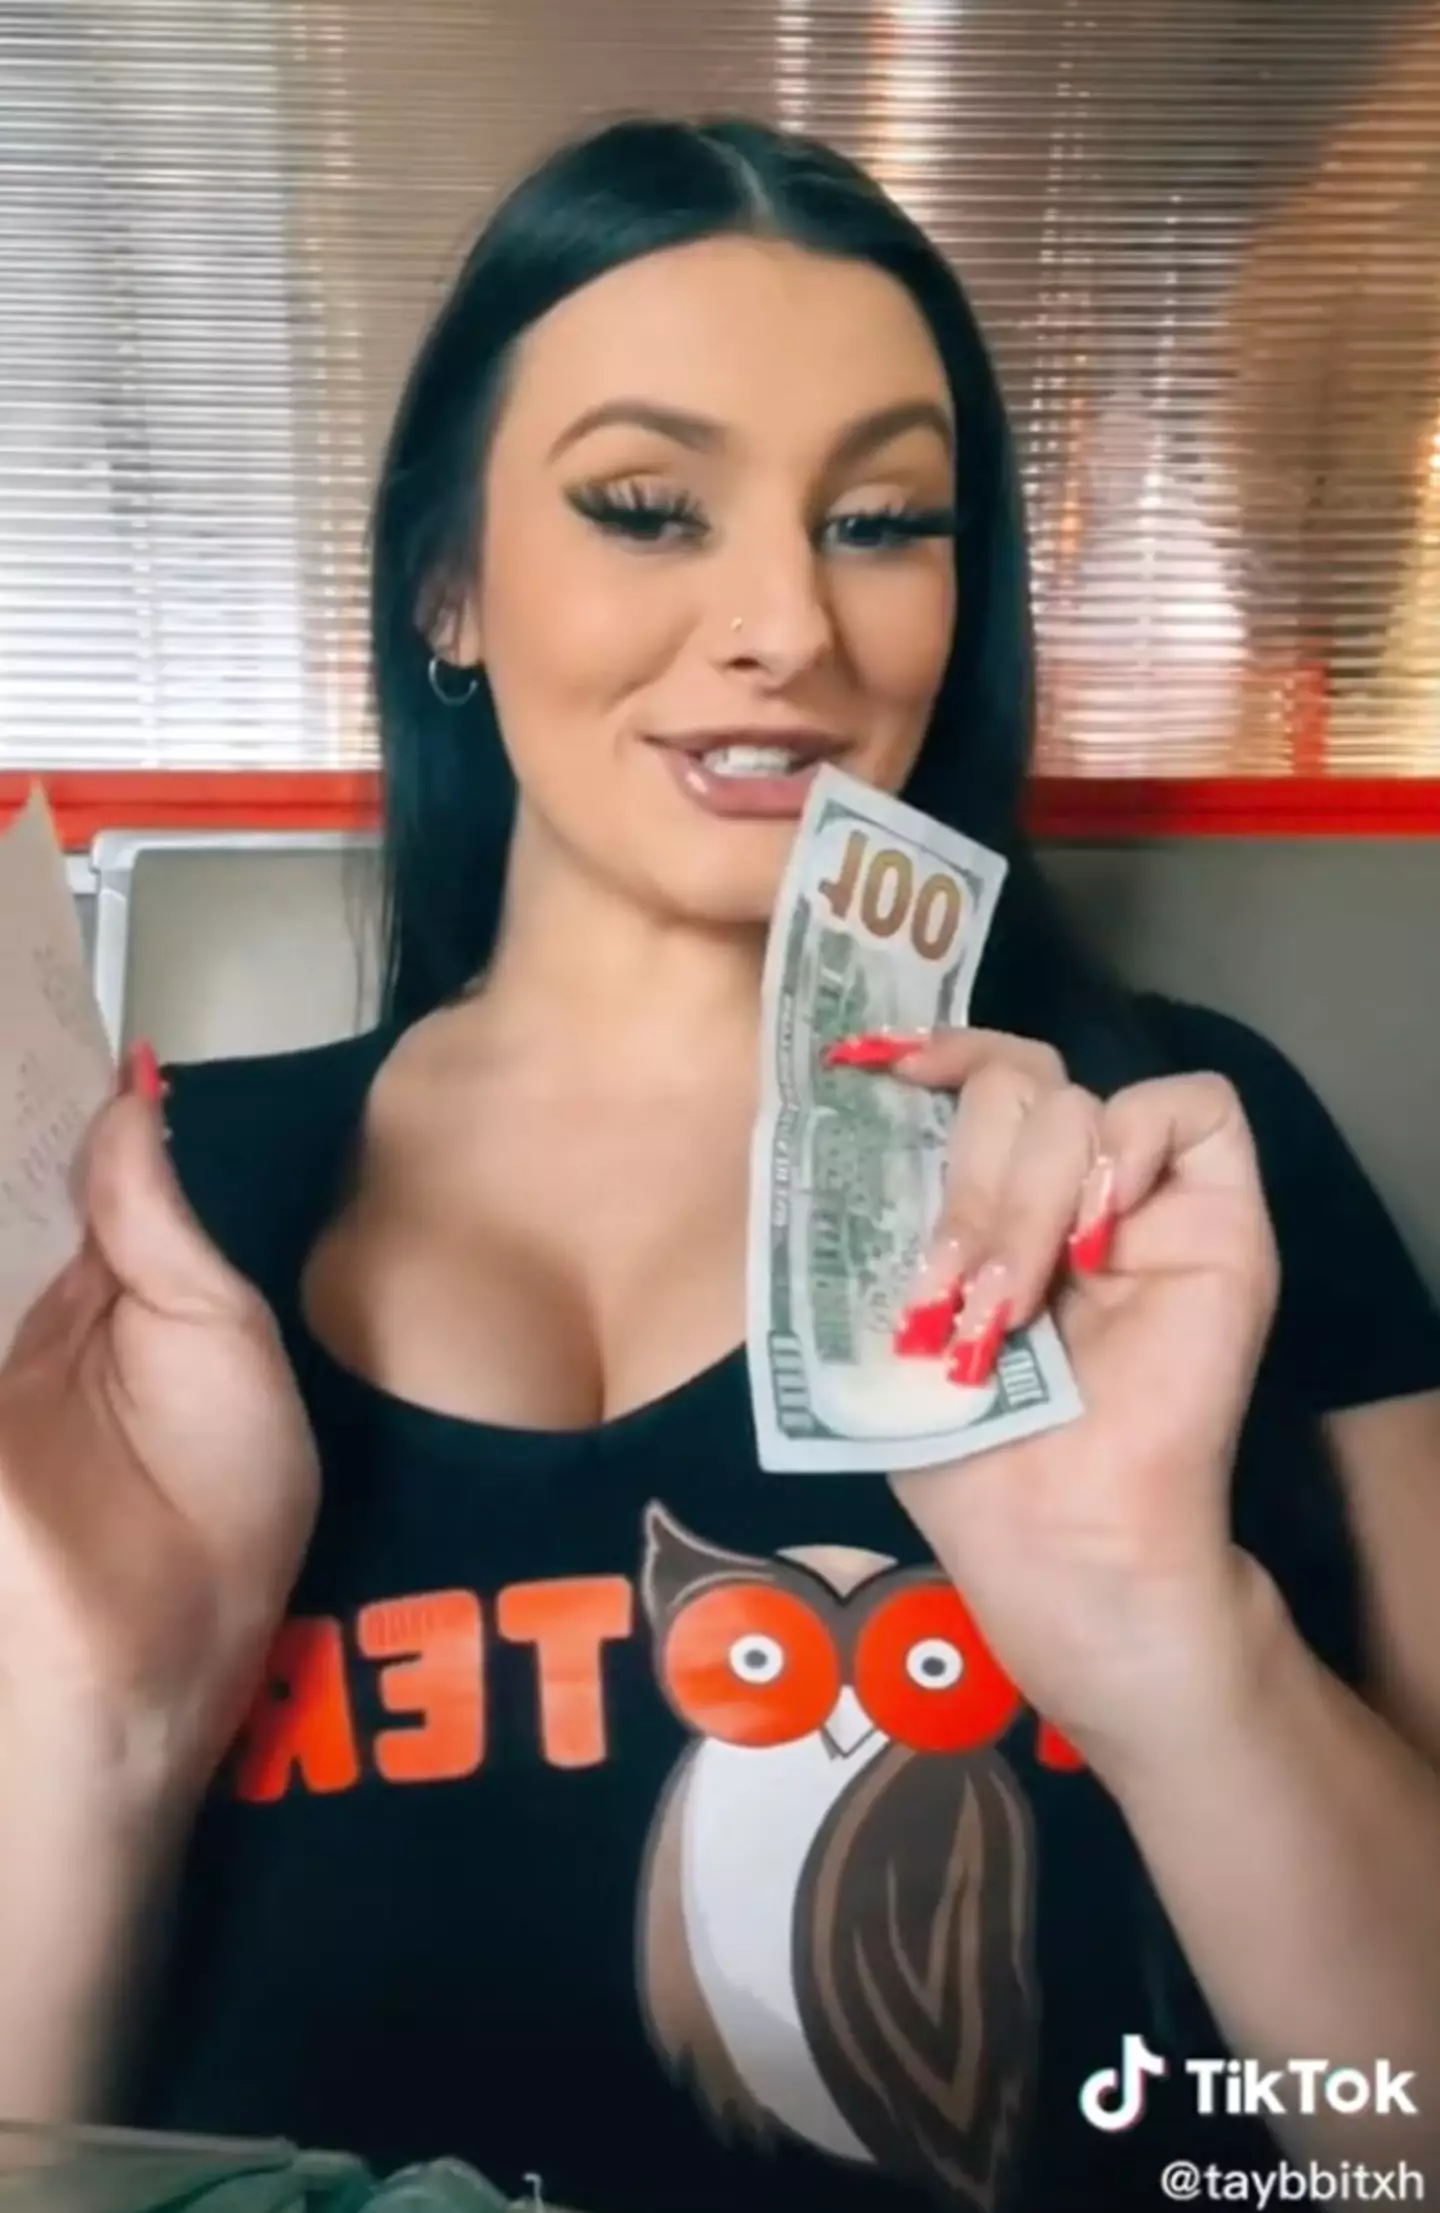 Customers at Hooters were very generous to their pregnant server.